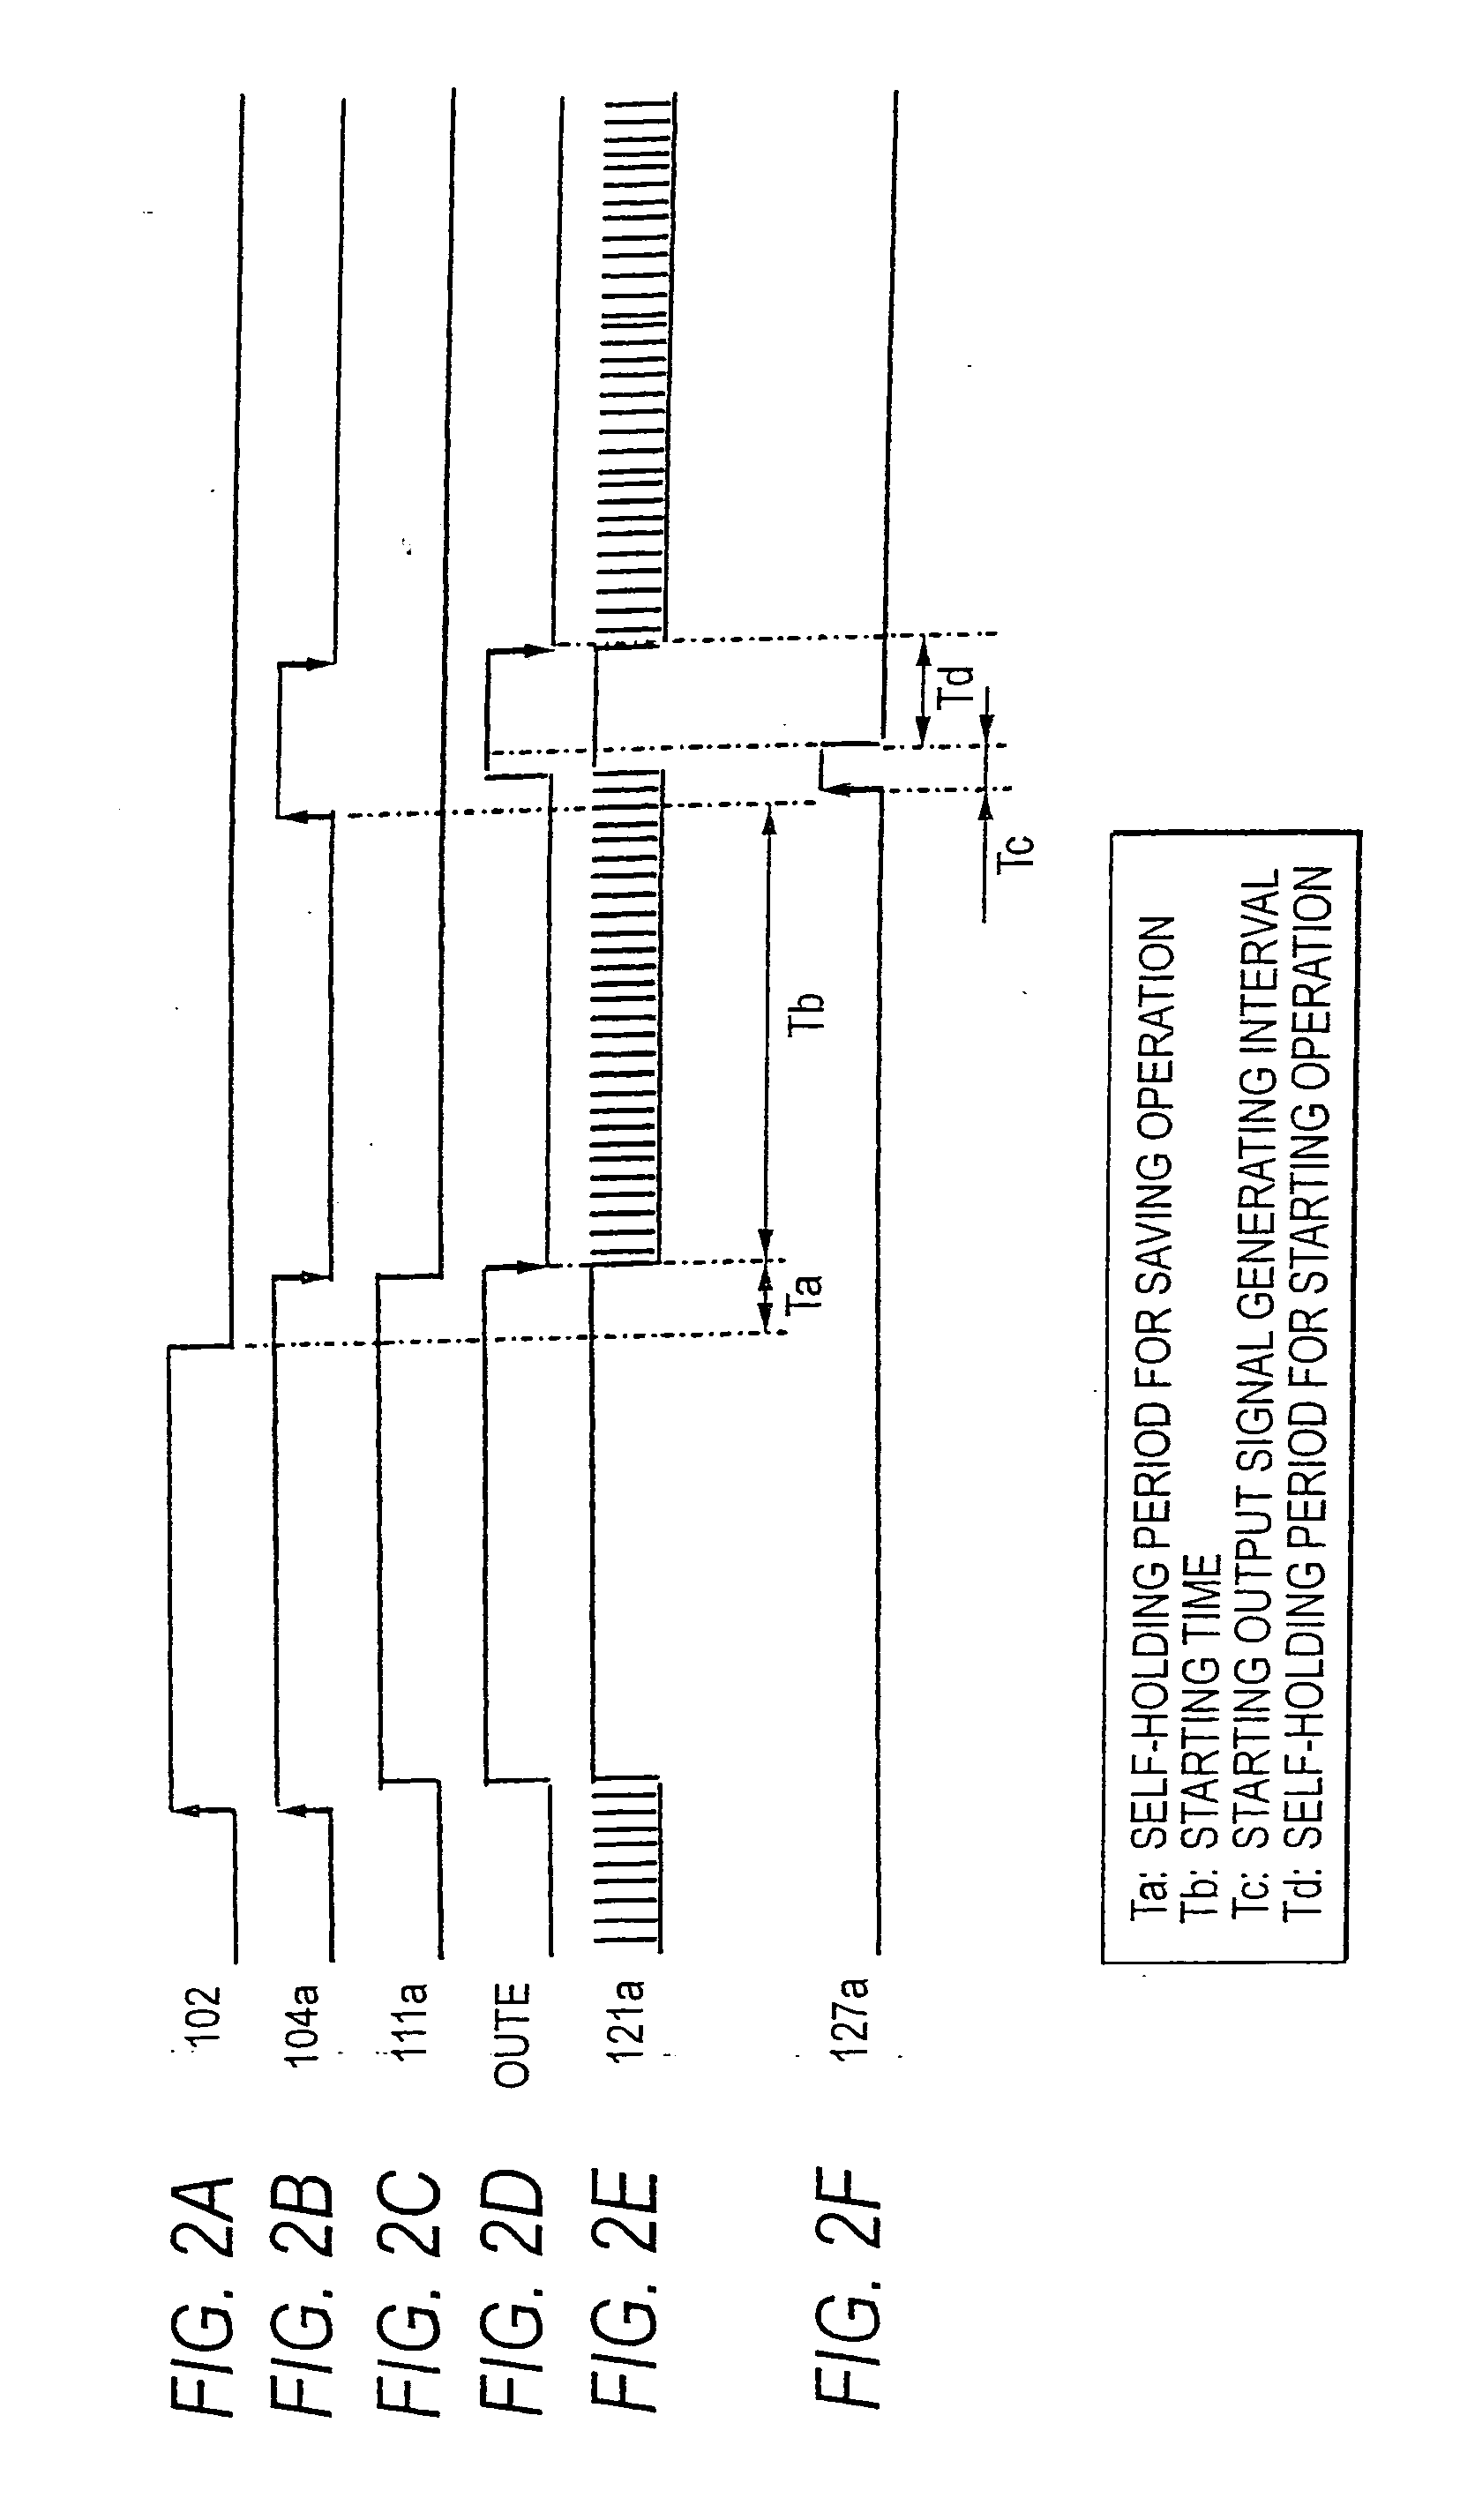 Car-mounted electronic control device